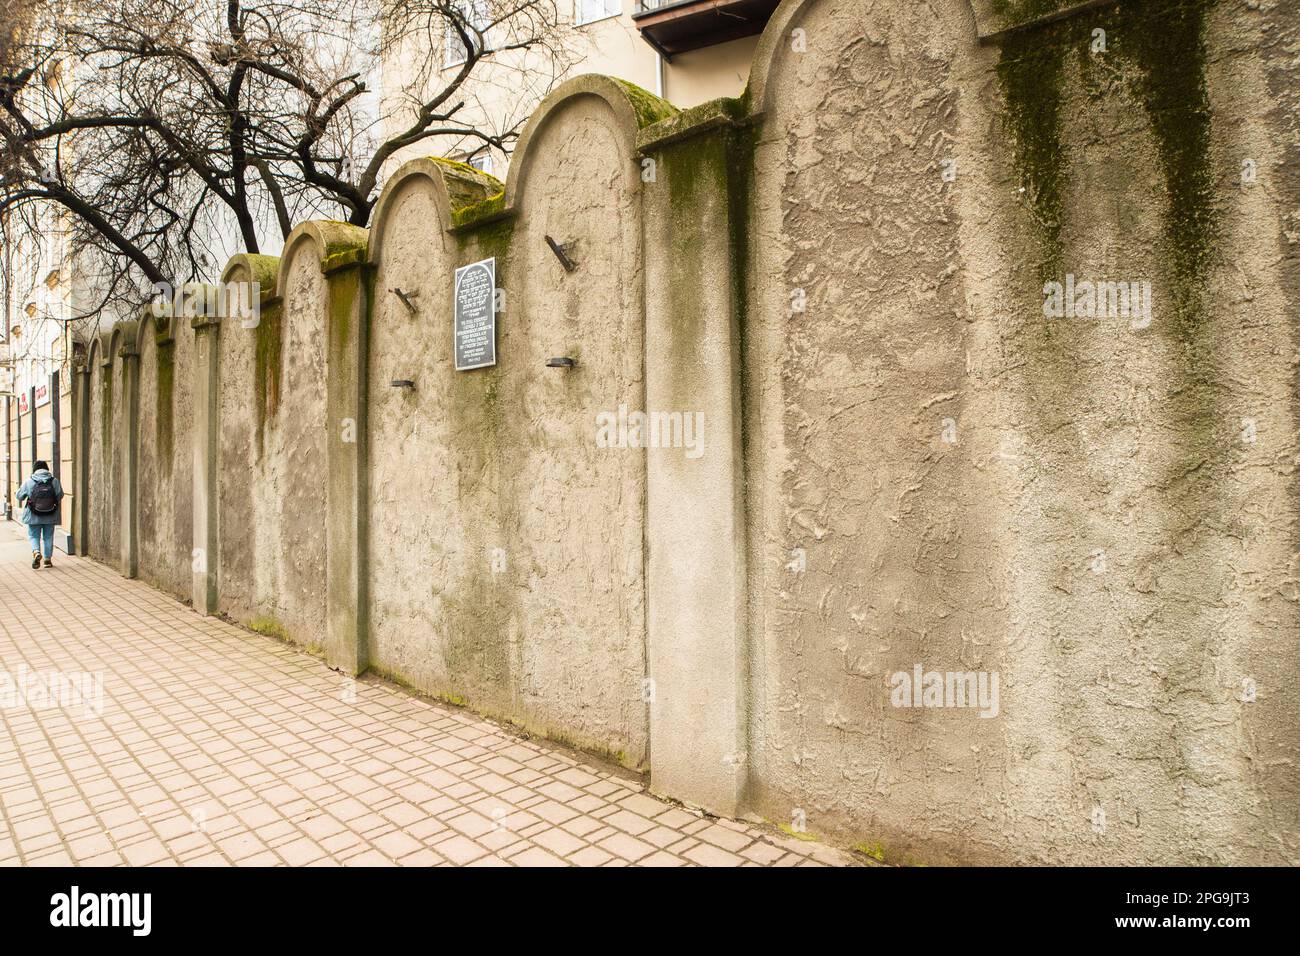 Krakow, Poland - march 7, 2023: Fragment of the wall of Jewish Ghetto in Krakow, Poland. Ghetto Walls were built in style of Jewish graves symbolizing Stock Photo